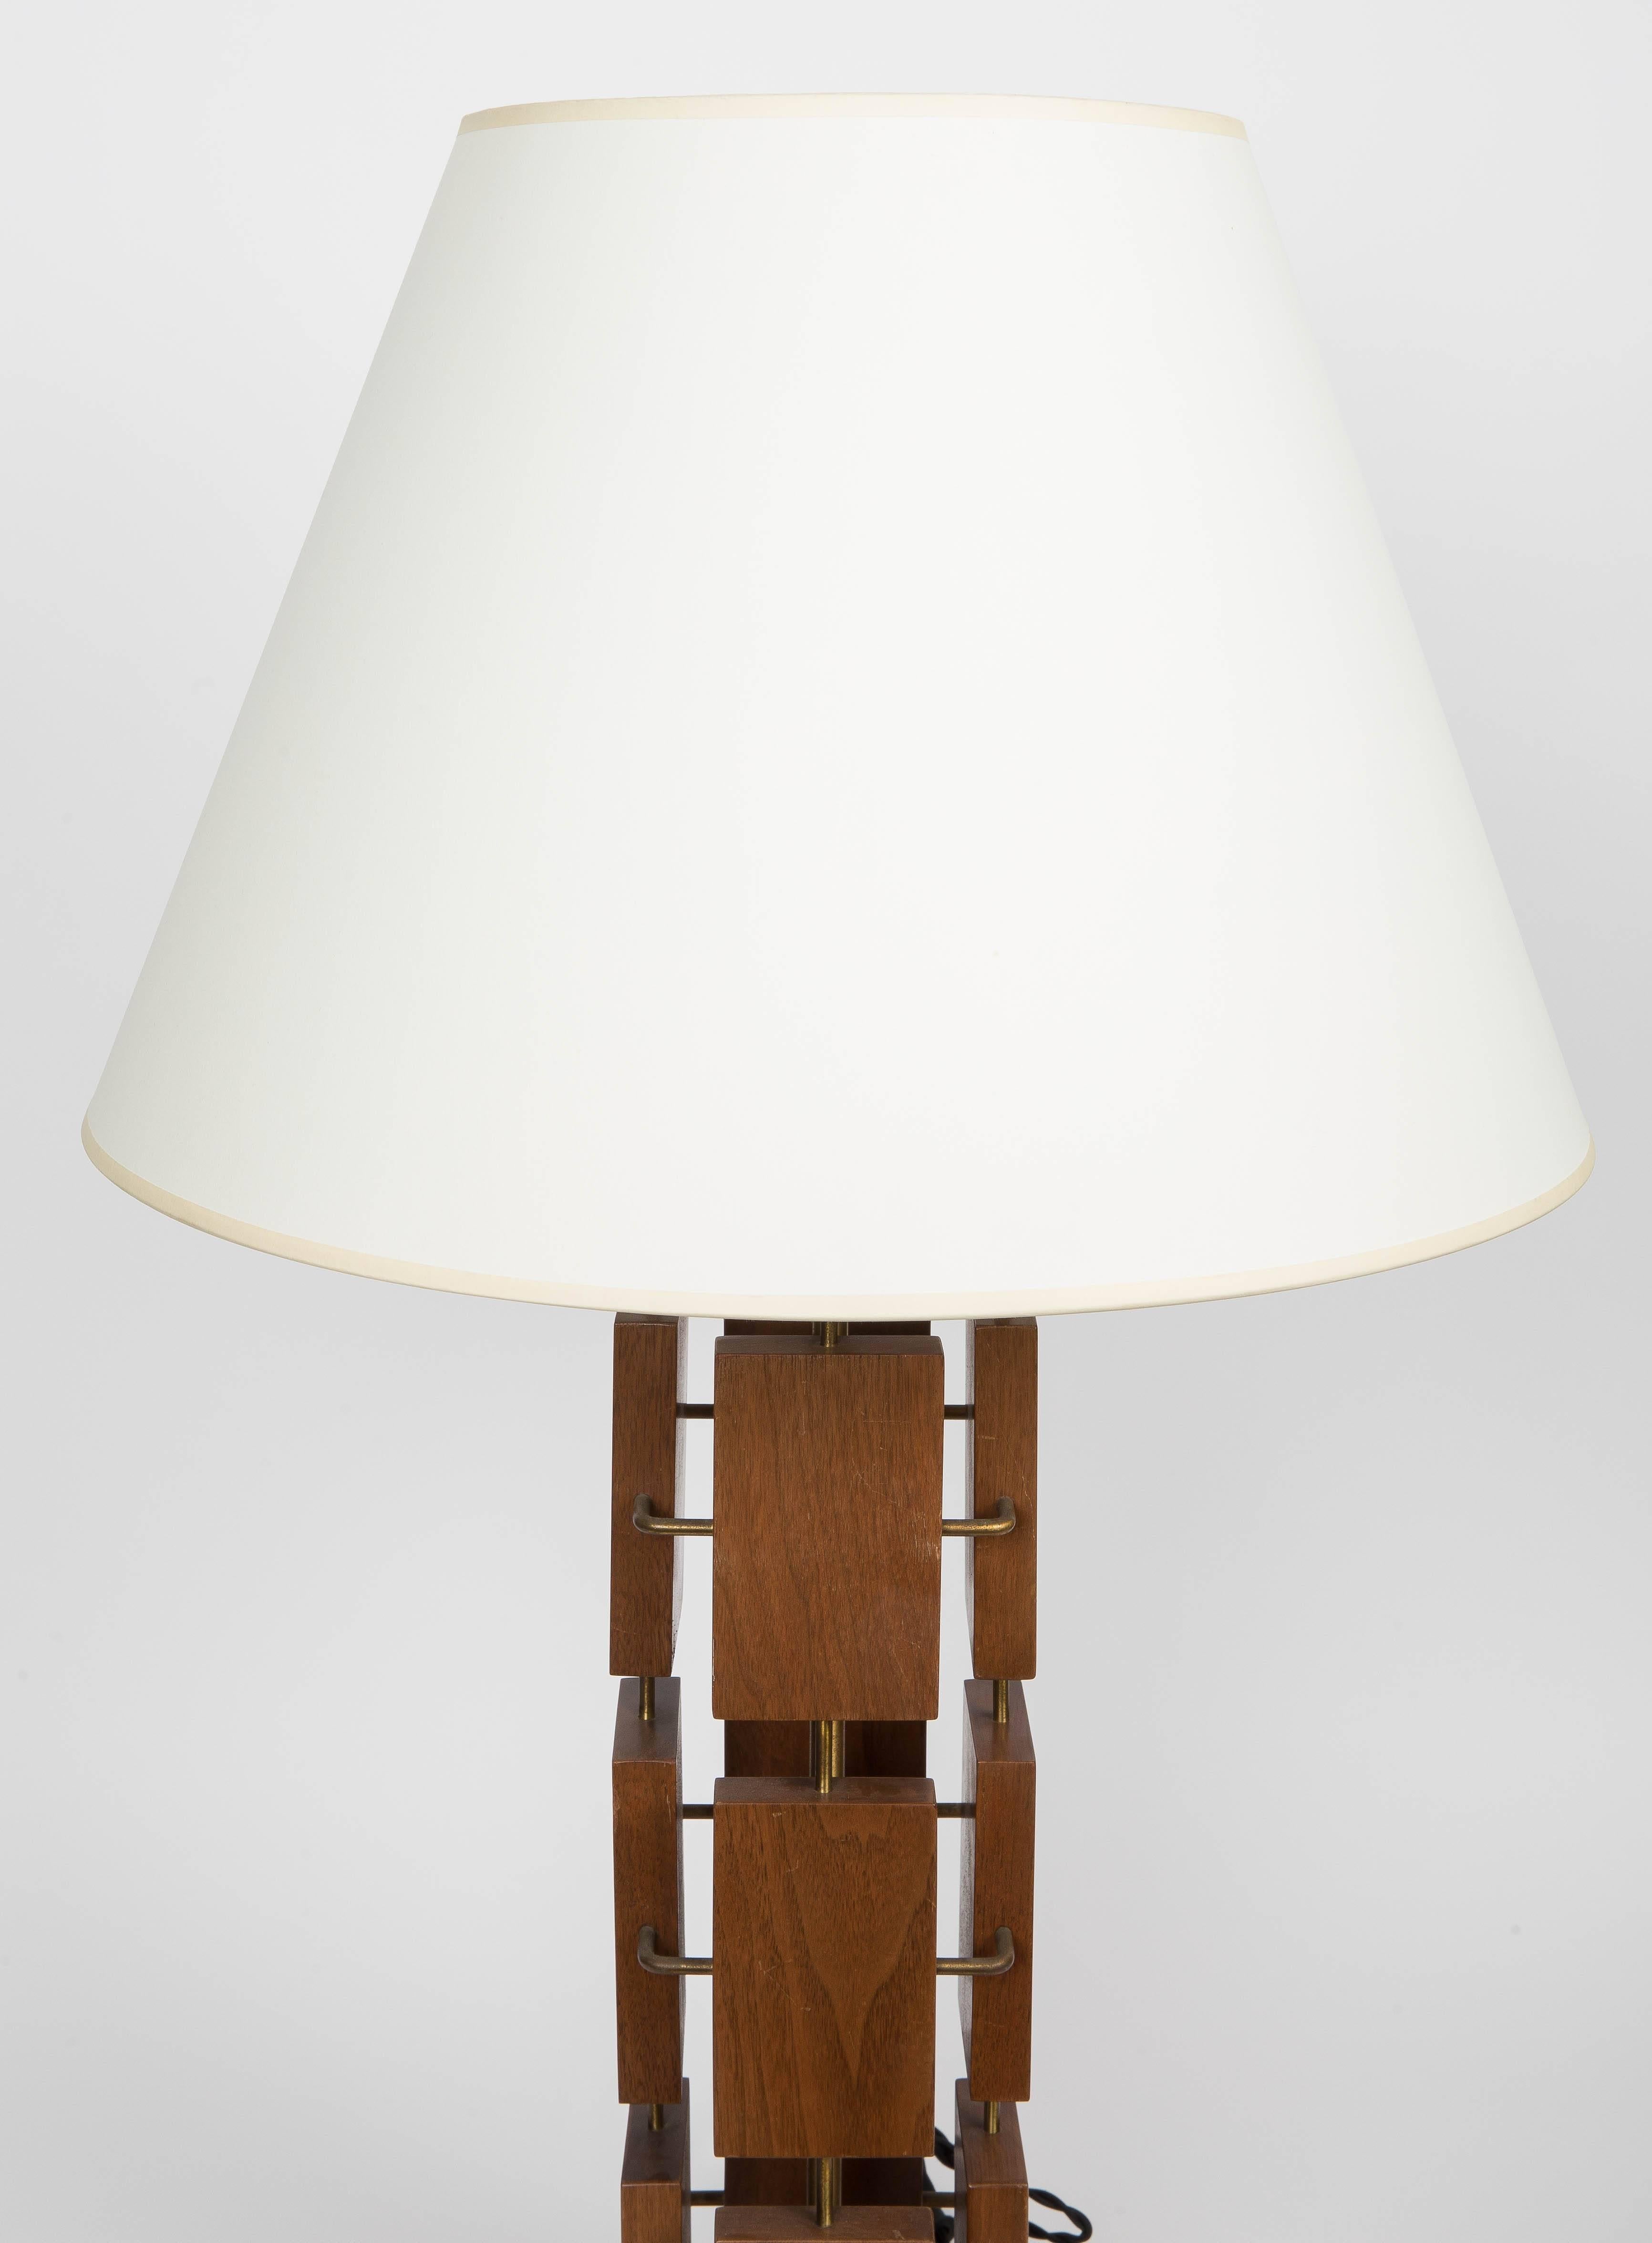 Mid-20th Century Mahogany and Brass Modernist Table Lamp, USA, 1950s